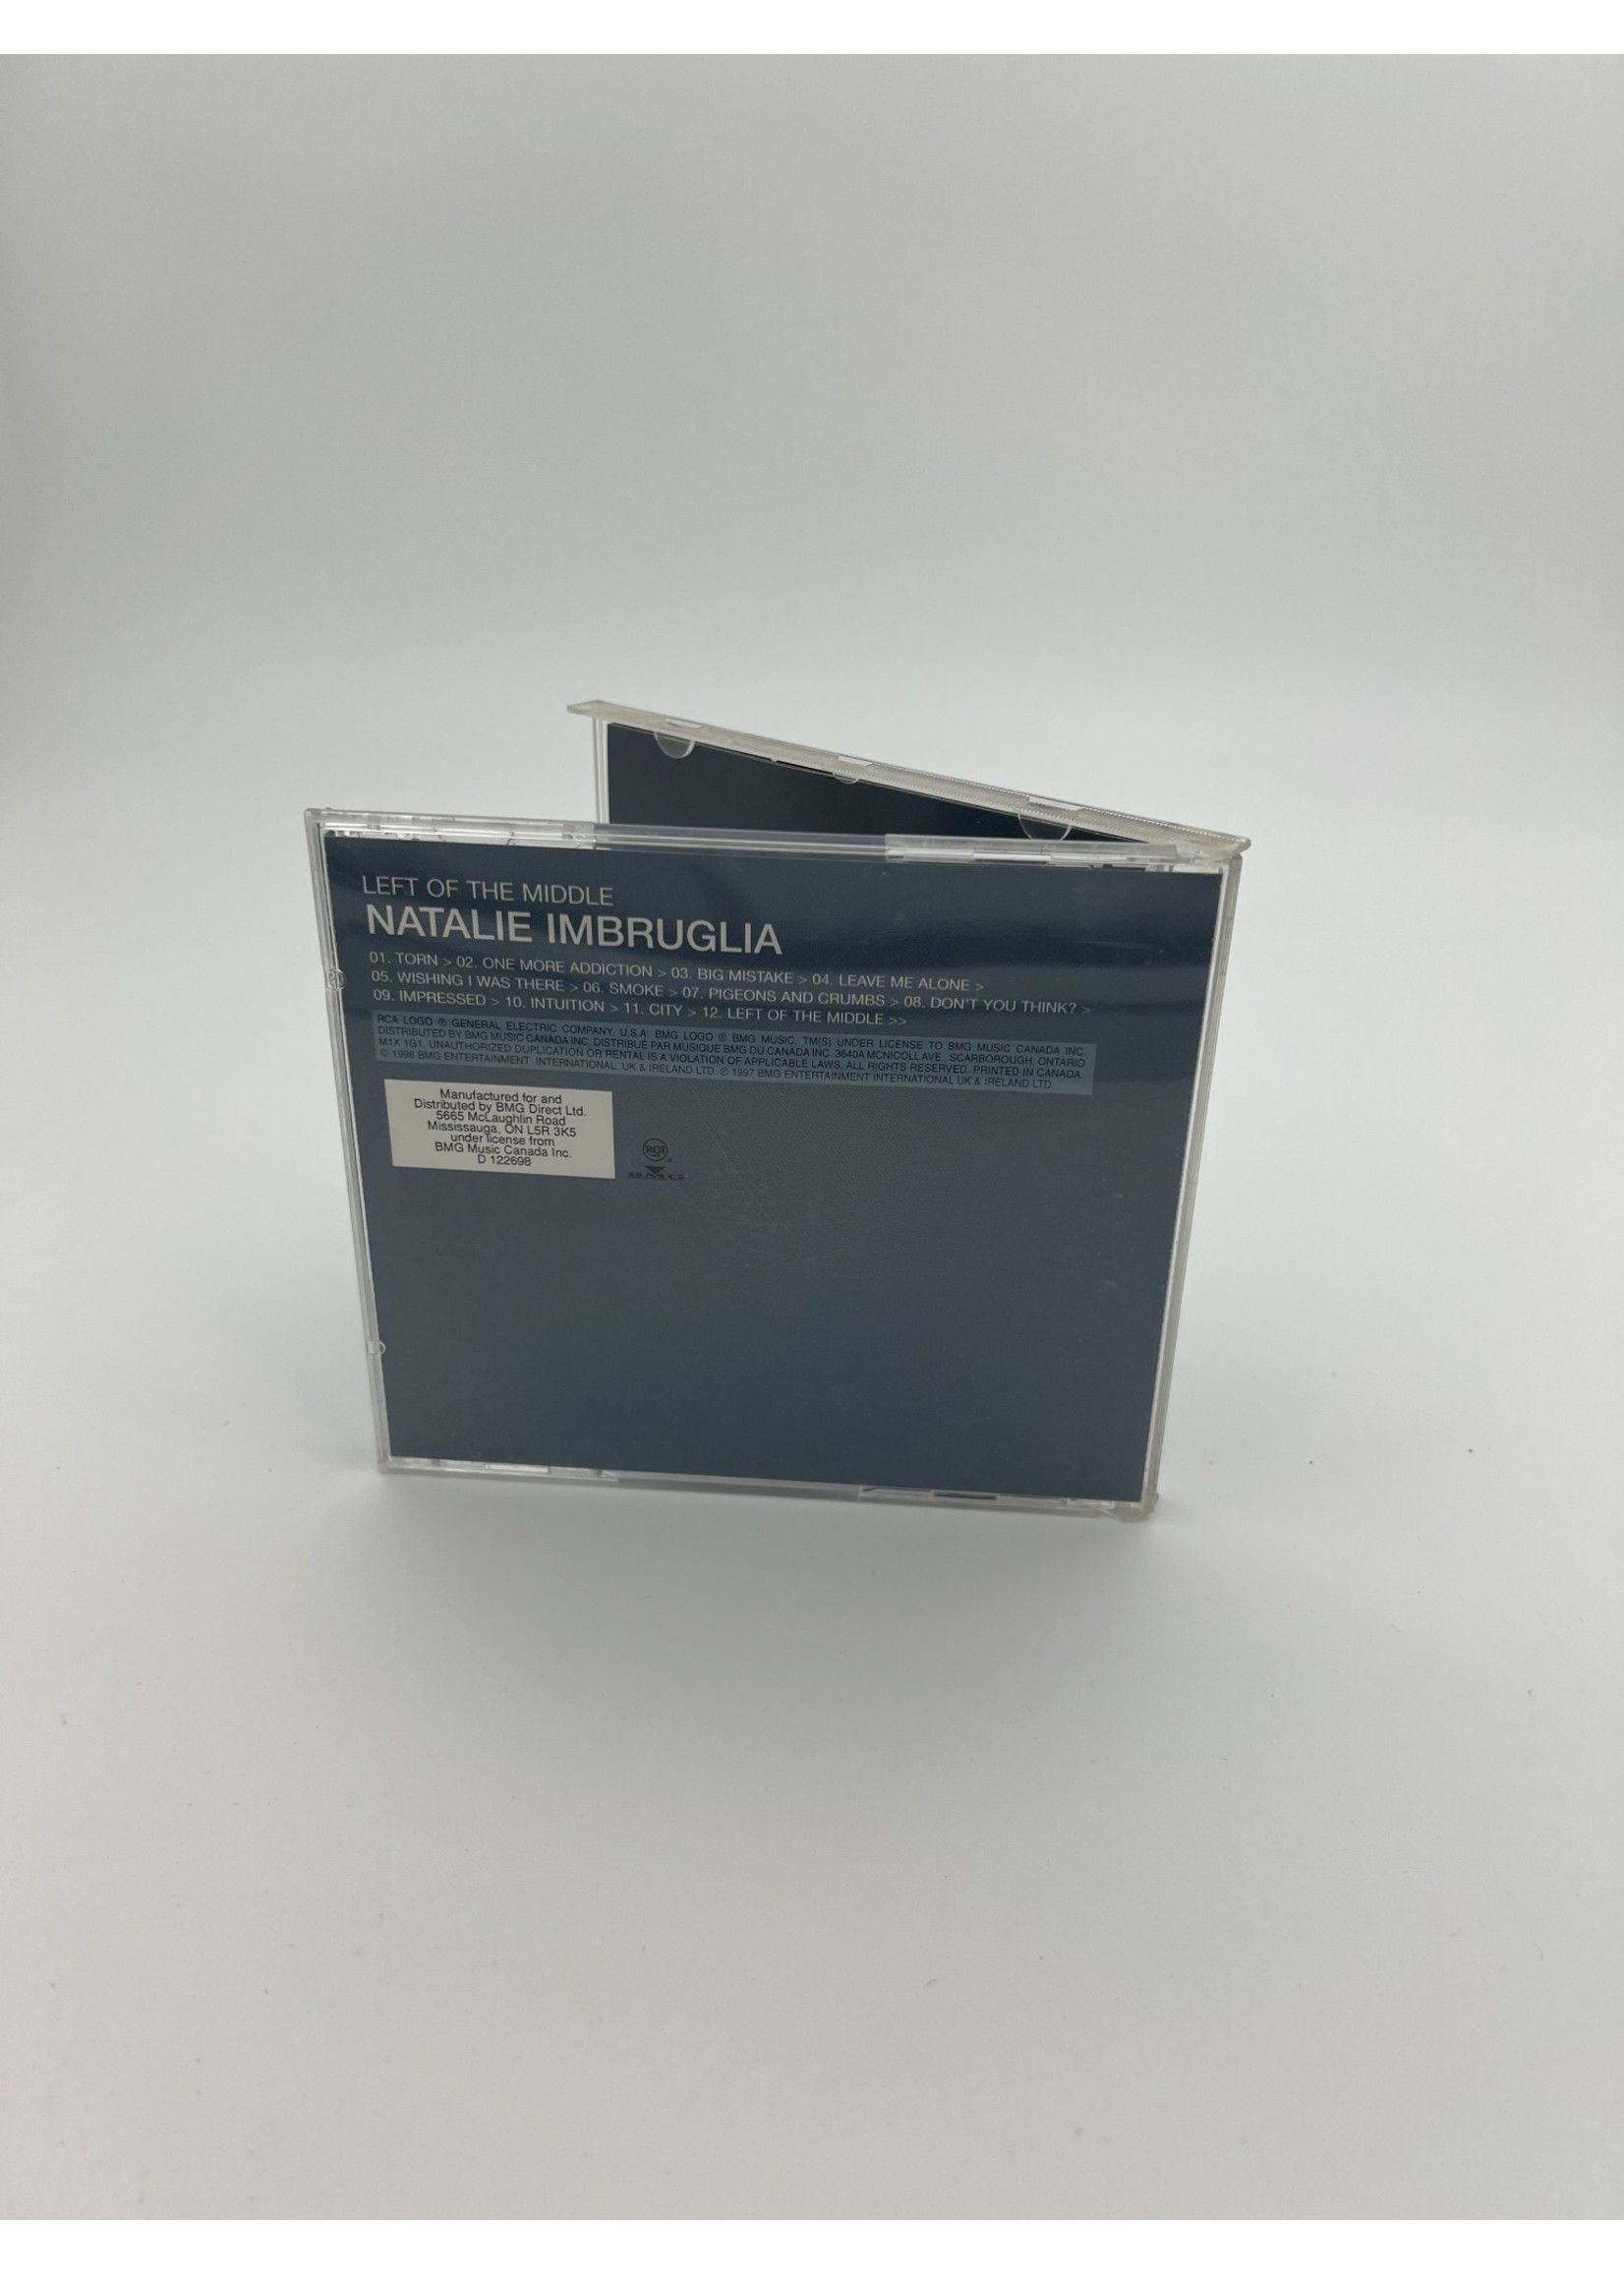 CD Natalie Imbruglia Left Of The Middle Cd